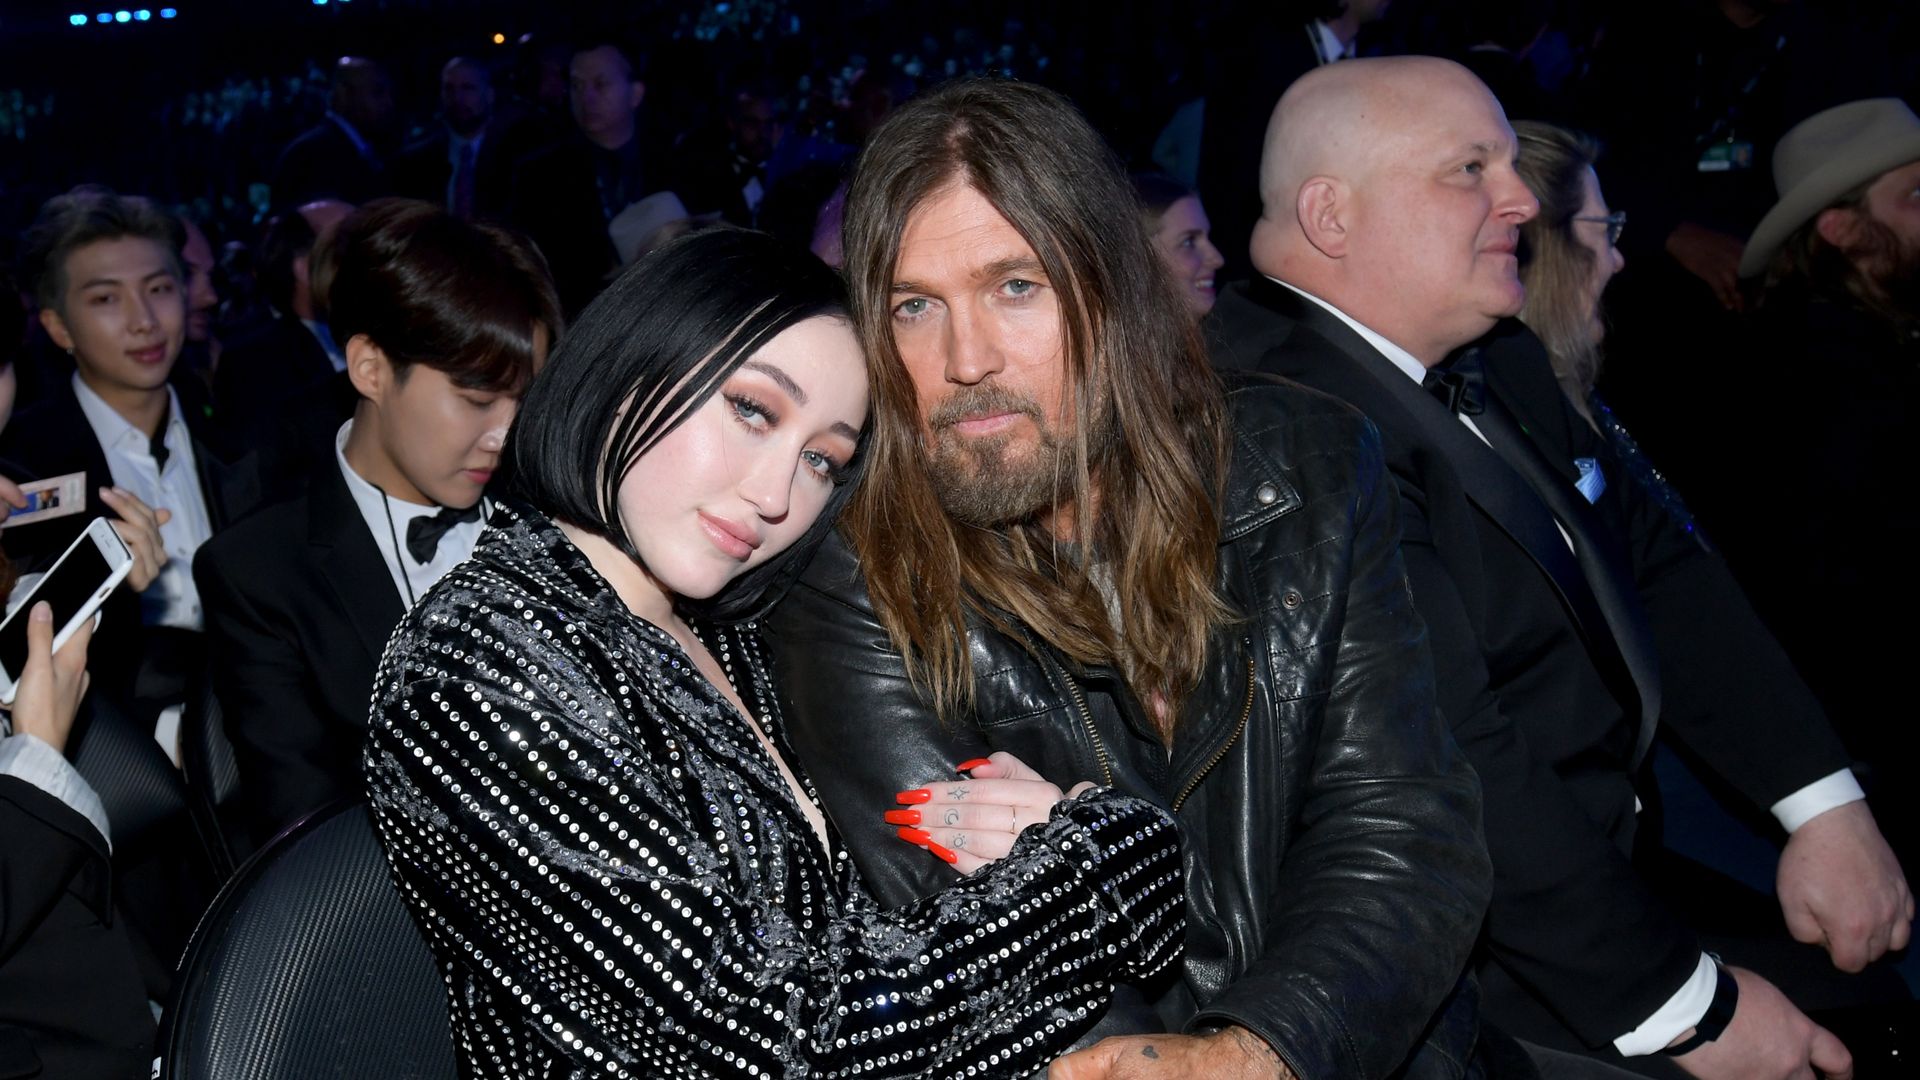 Billy Ray Cyrus takes advice from his daughter Noah Cyrus amid divorce